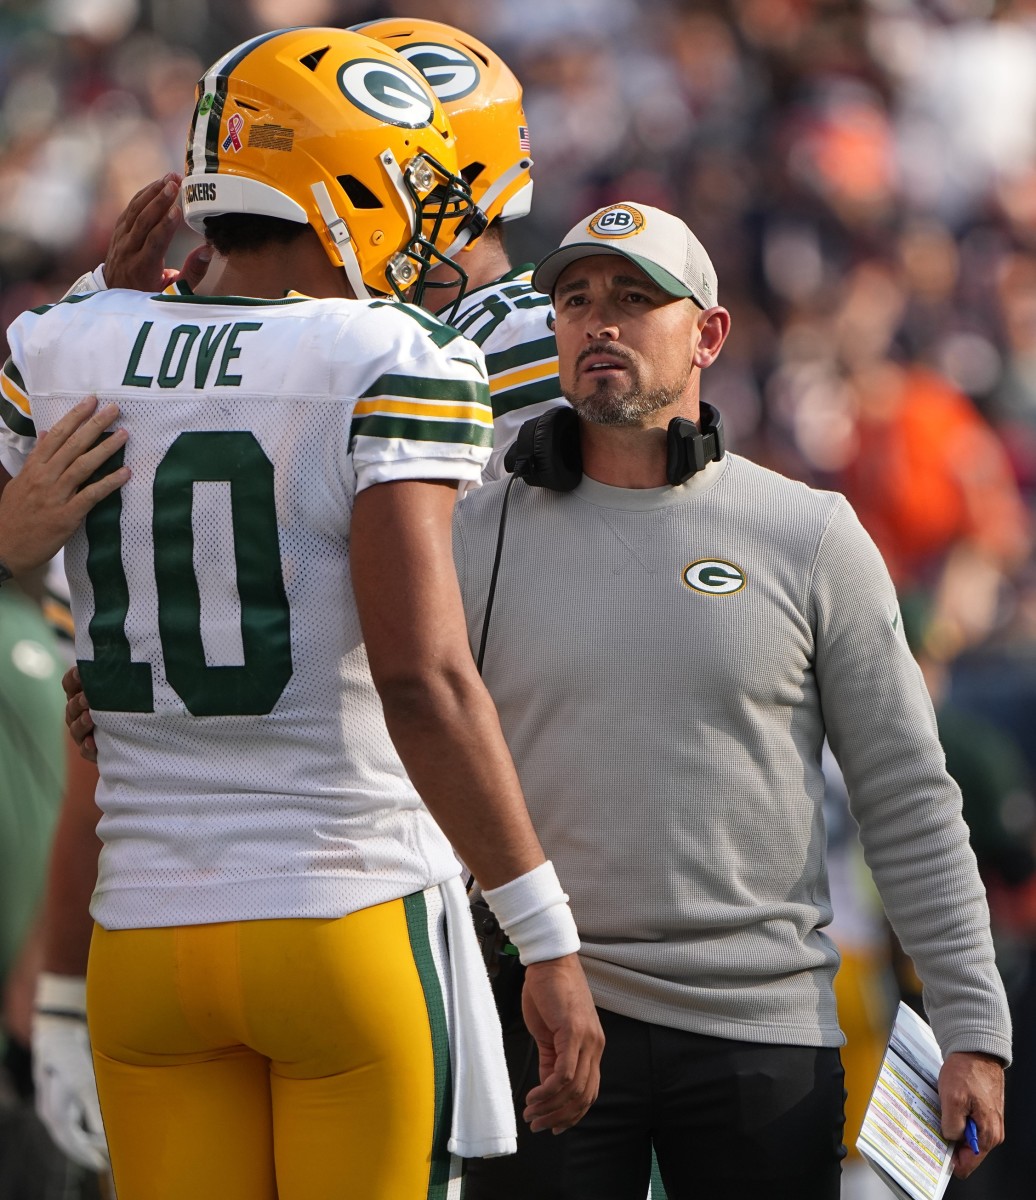 Packers coach Matt LaFleur now has Jordan Love as his starting quarterback after Green Bay traded Aaron Rodgers in the offseason to the Jets.